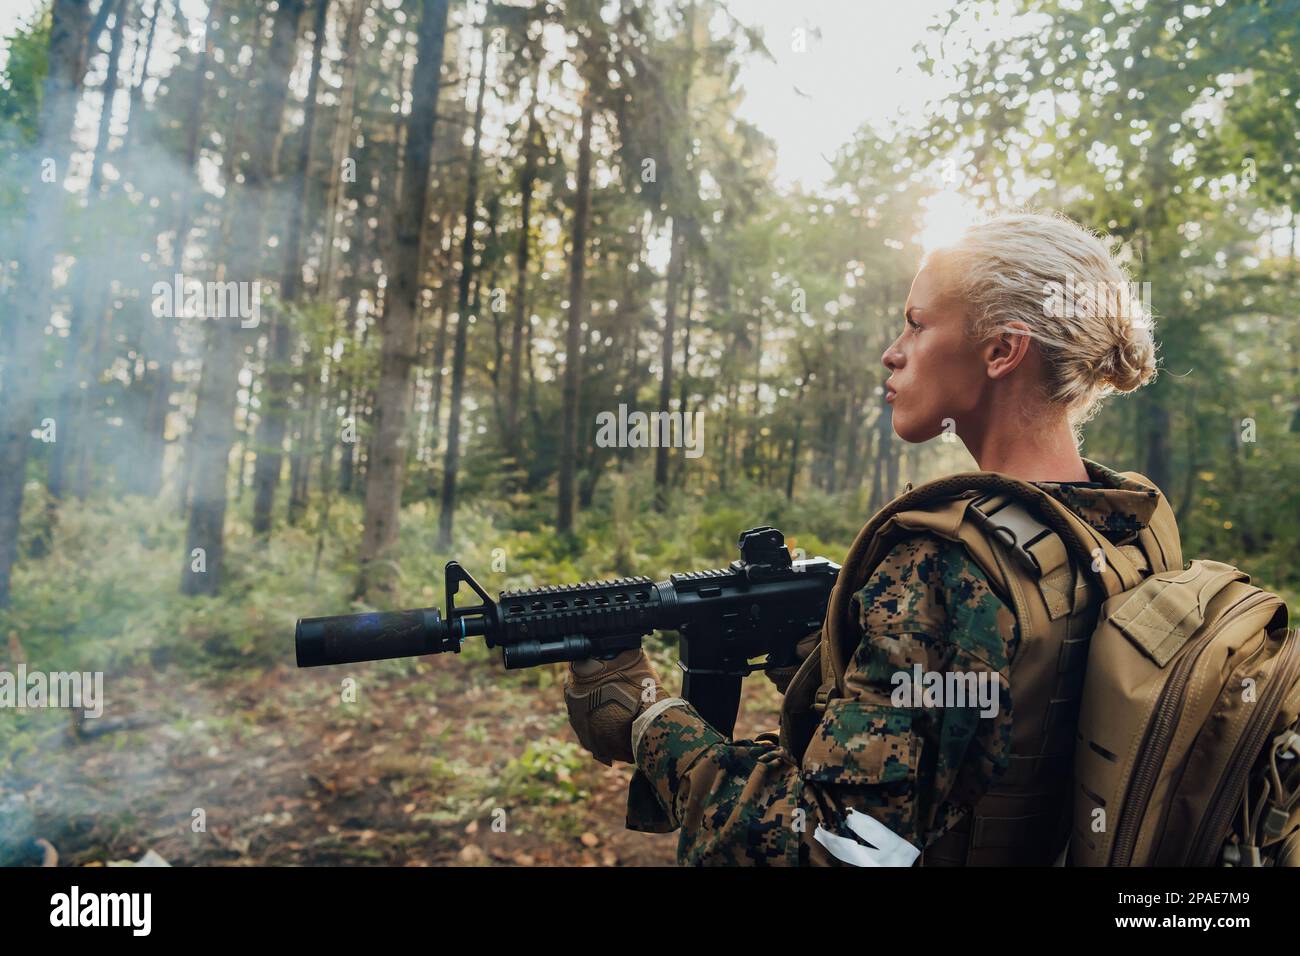 Woman soldier ready for battle wearing protective military gear and weapon Stock Photo